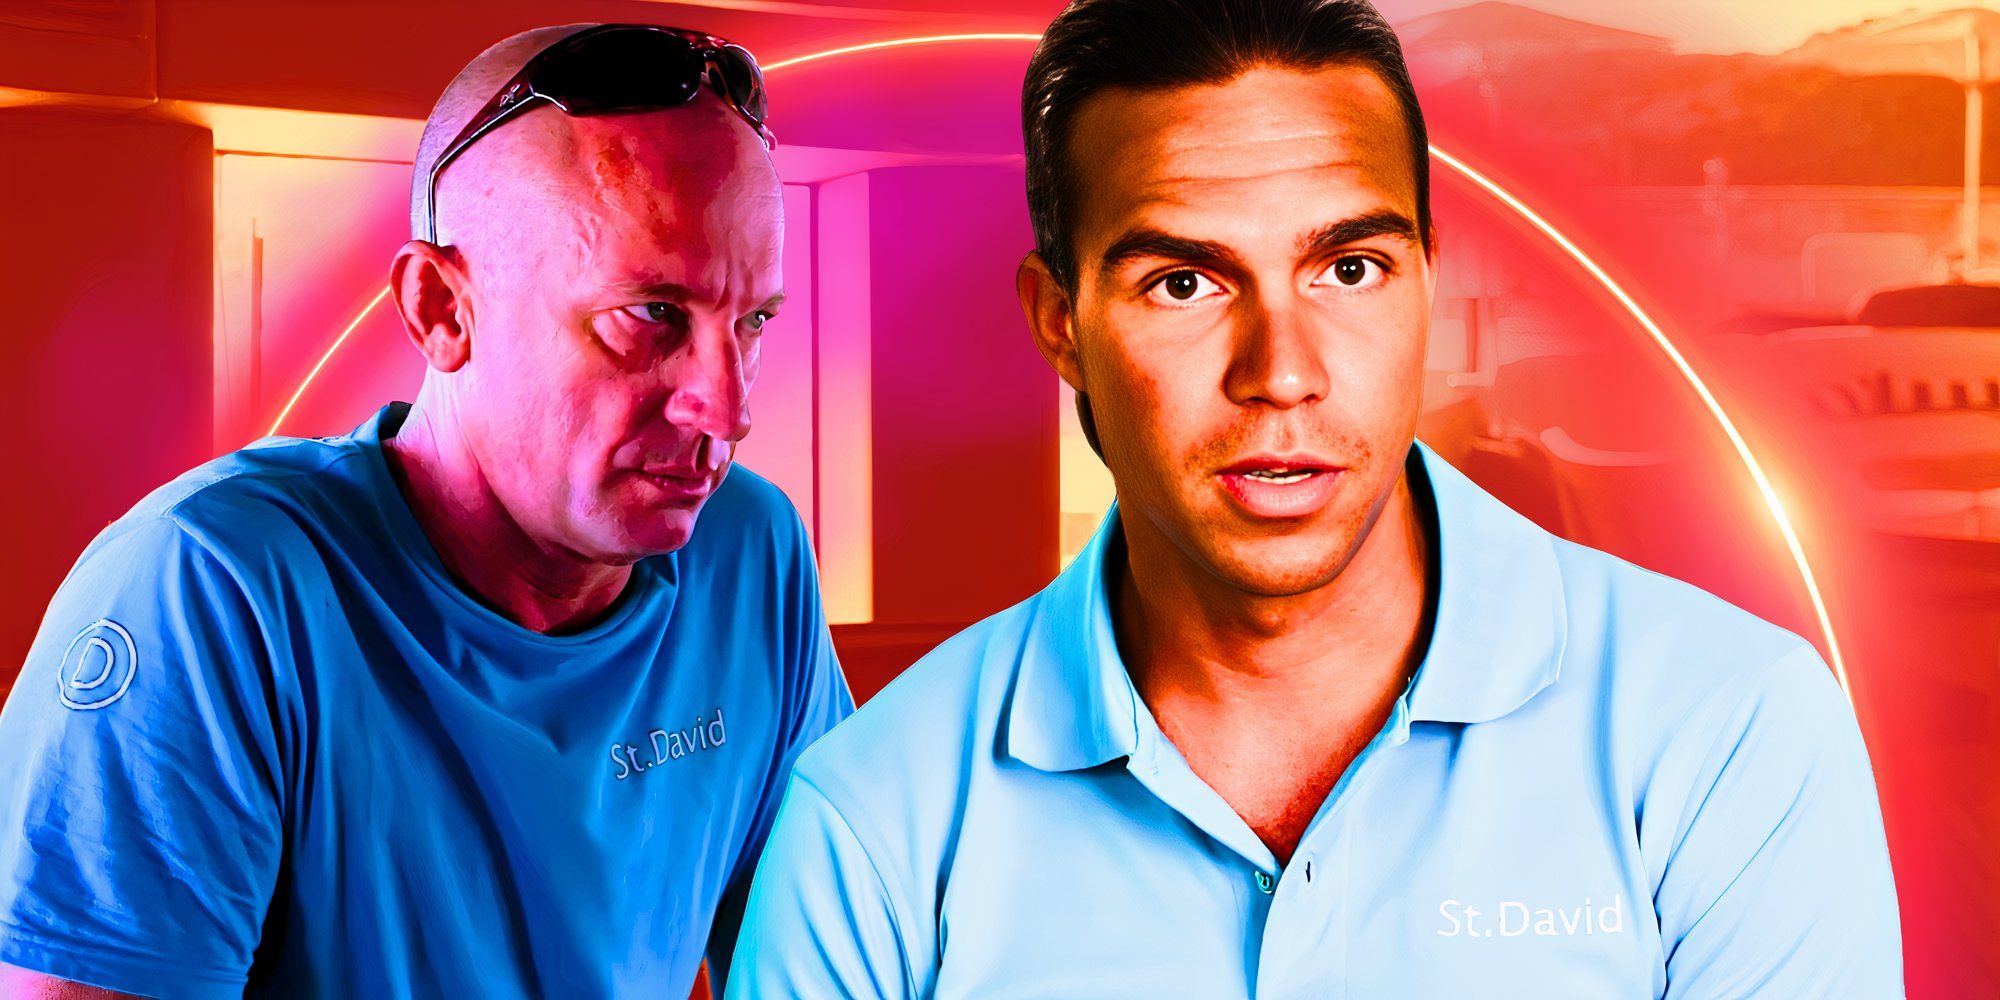 Below Deck’s Captain Kerry Titheradge looks angry and Ben Willoughby has an expression of slight surprise.